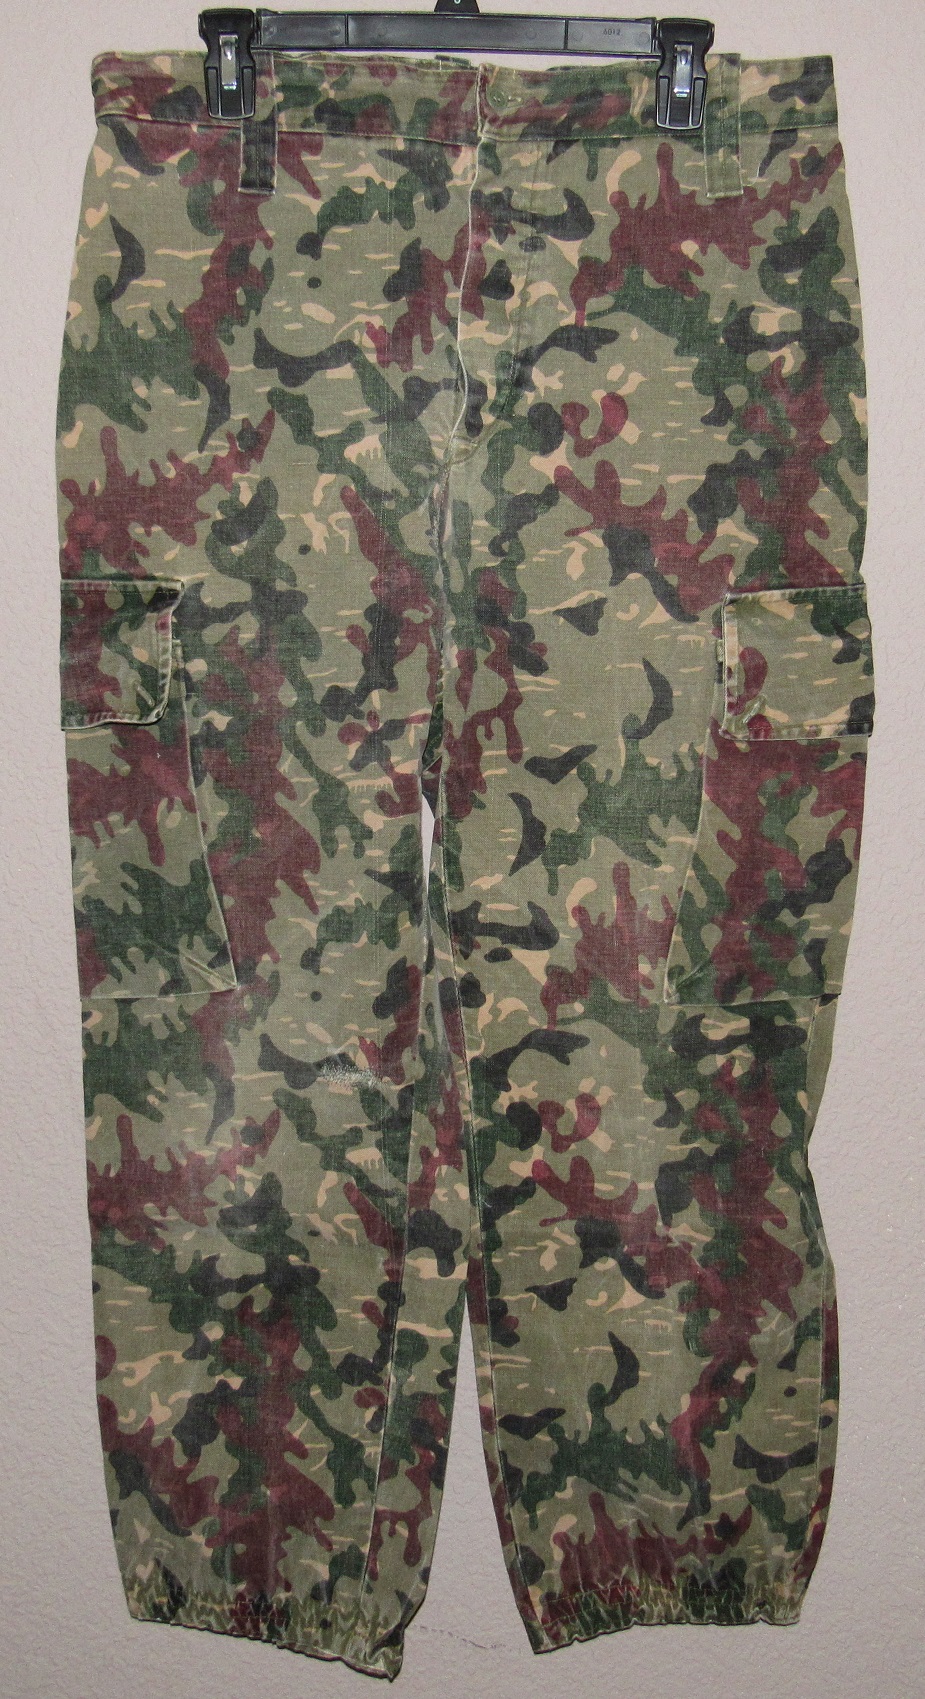 Early Spanish Camouflage uniforms. Spanis14